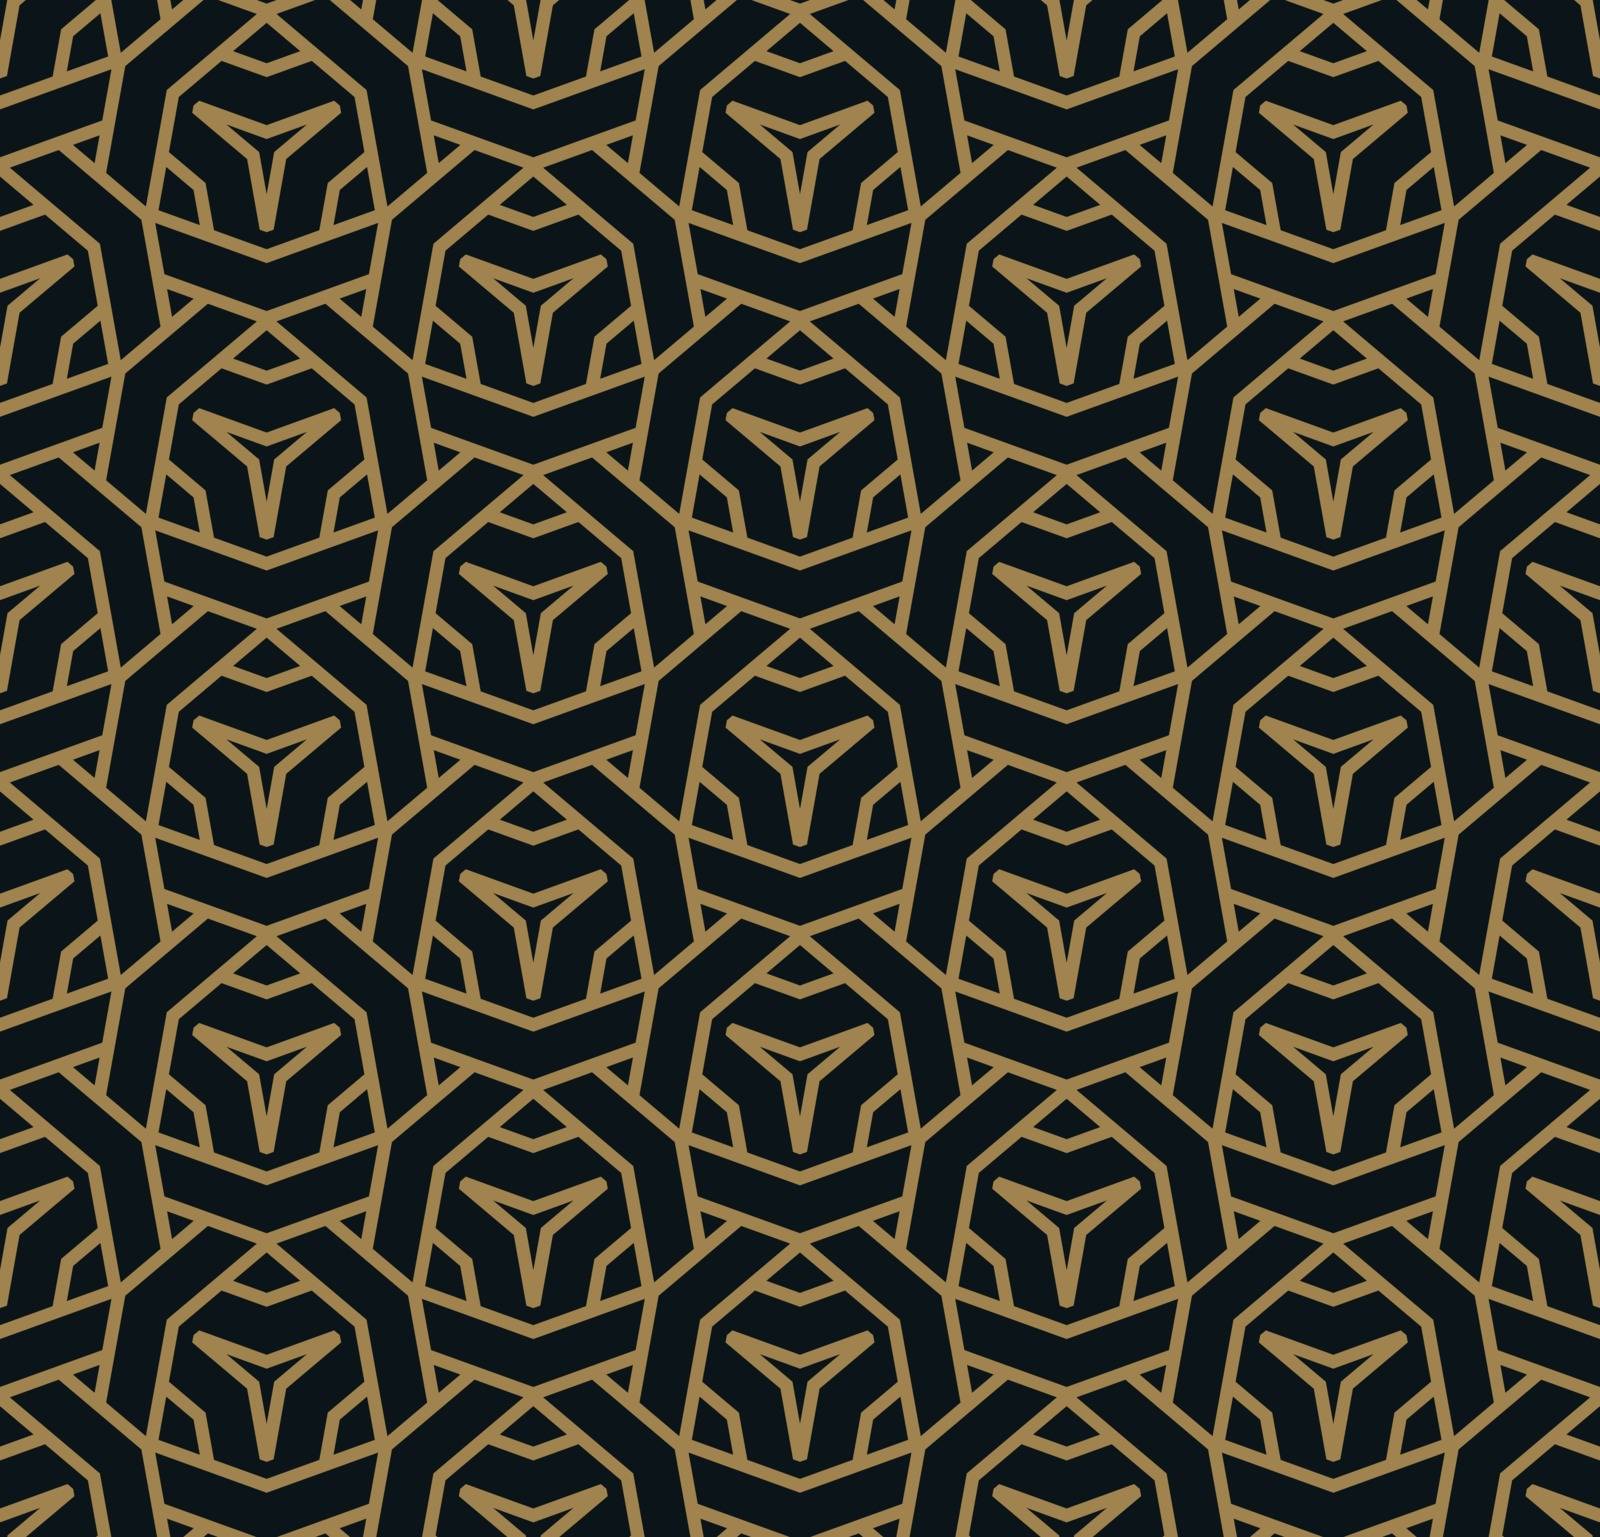 The geometric pattern. Seamless vector background.